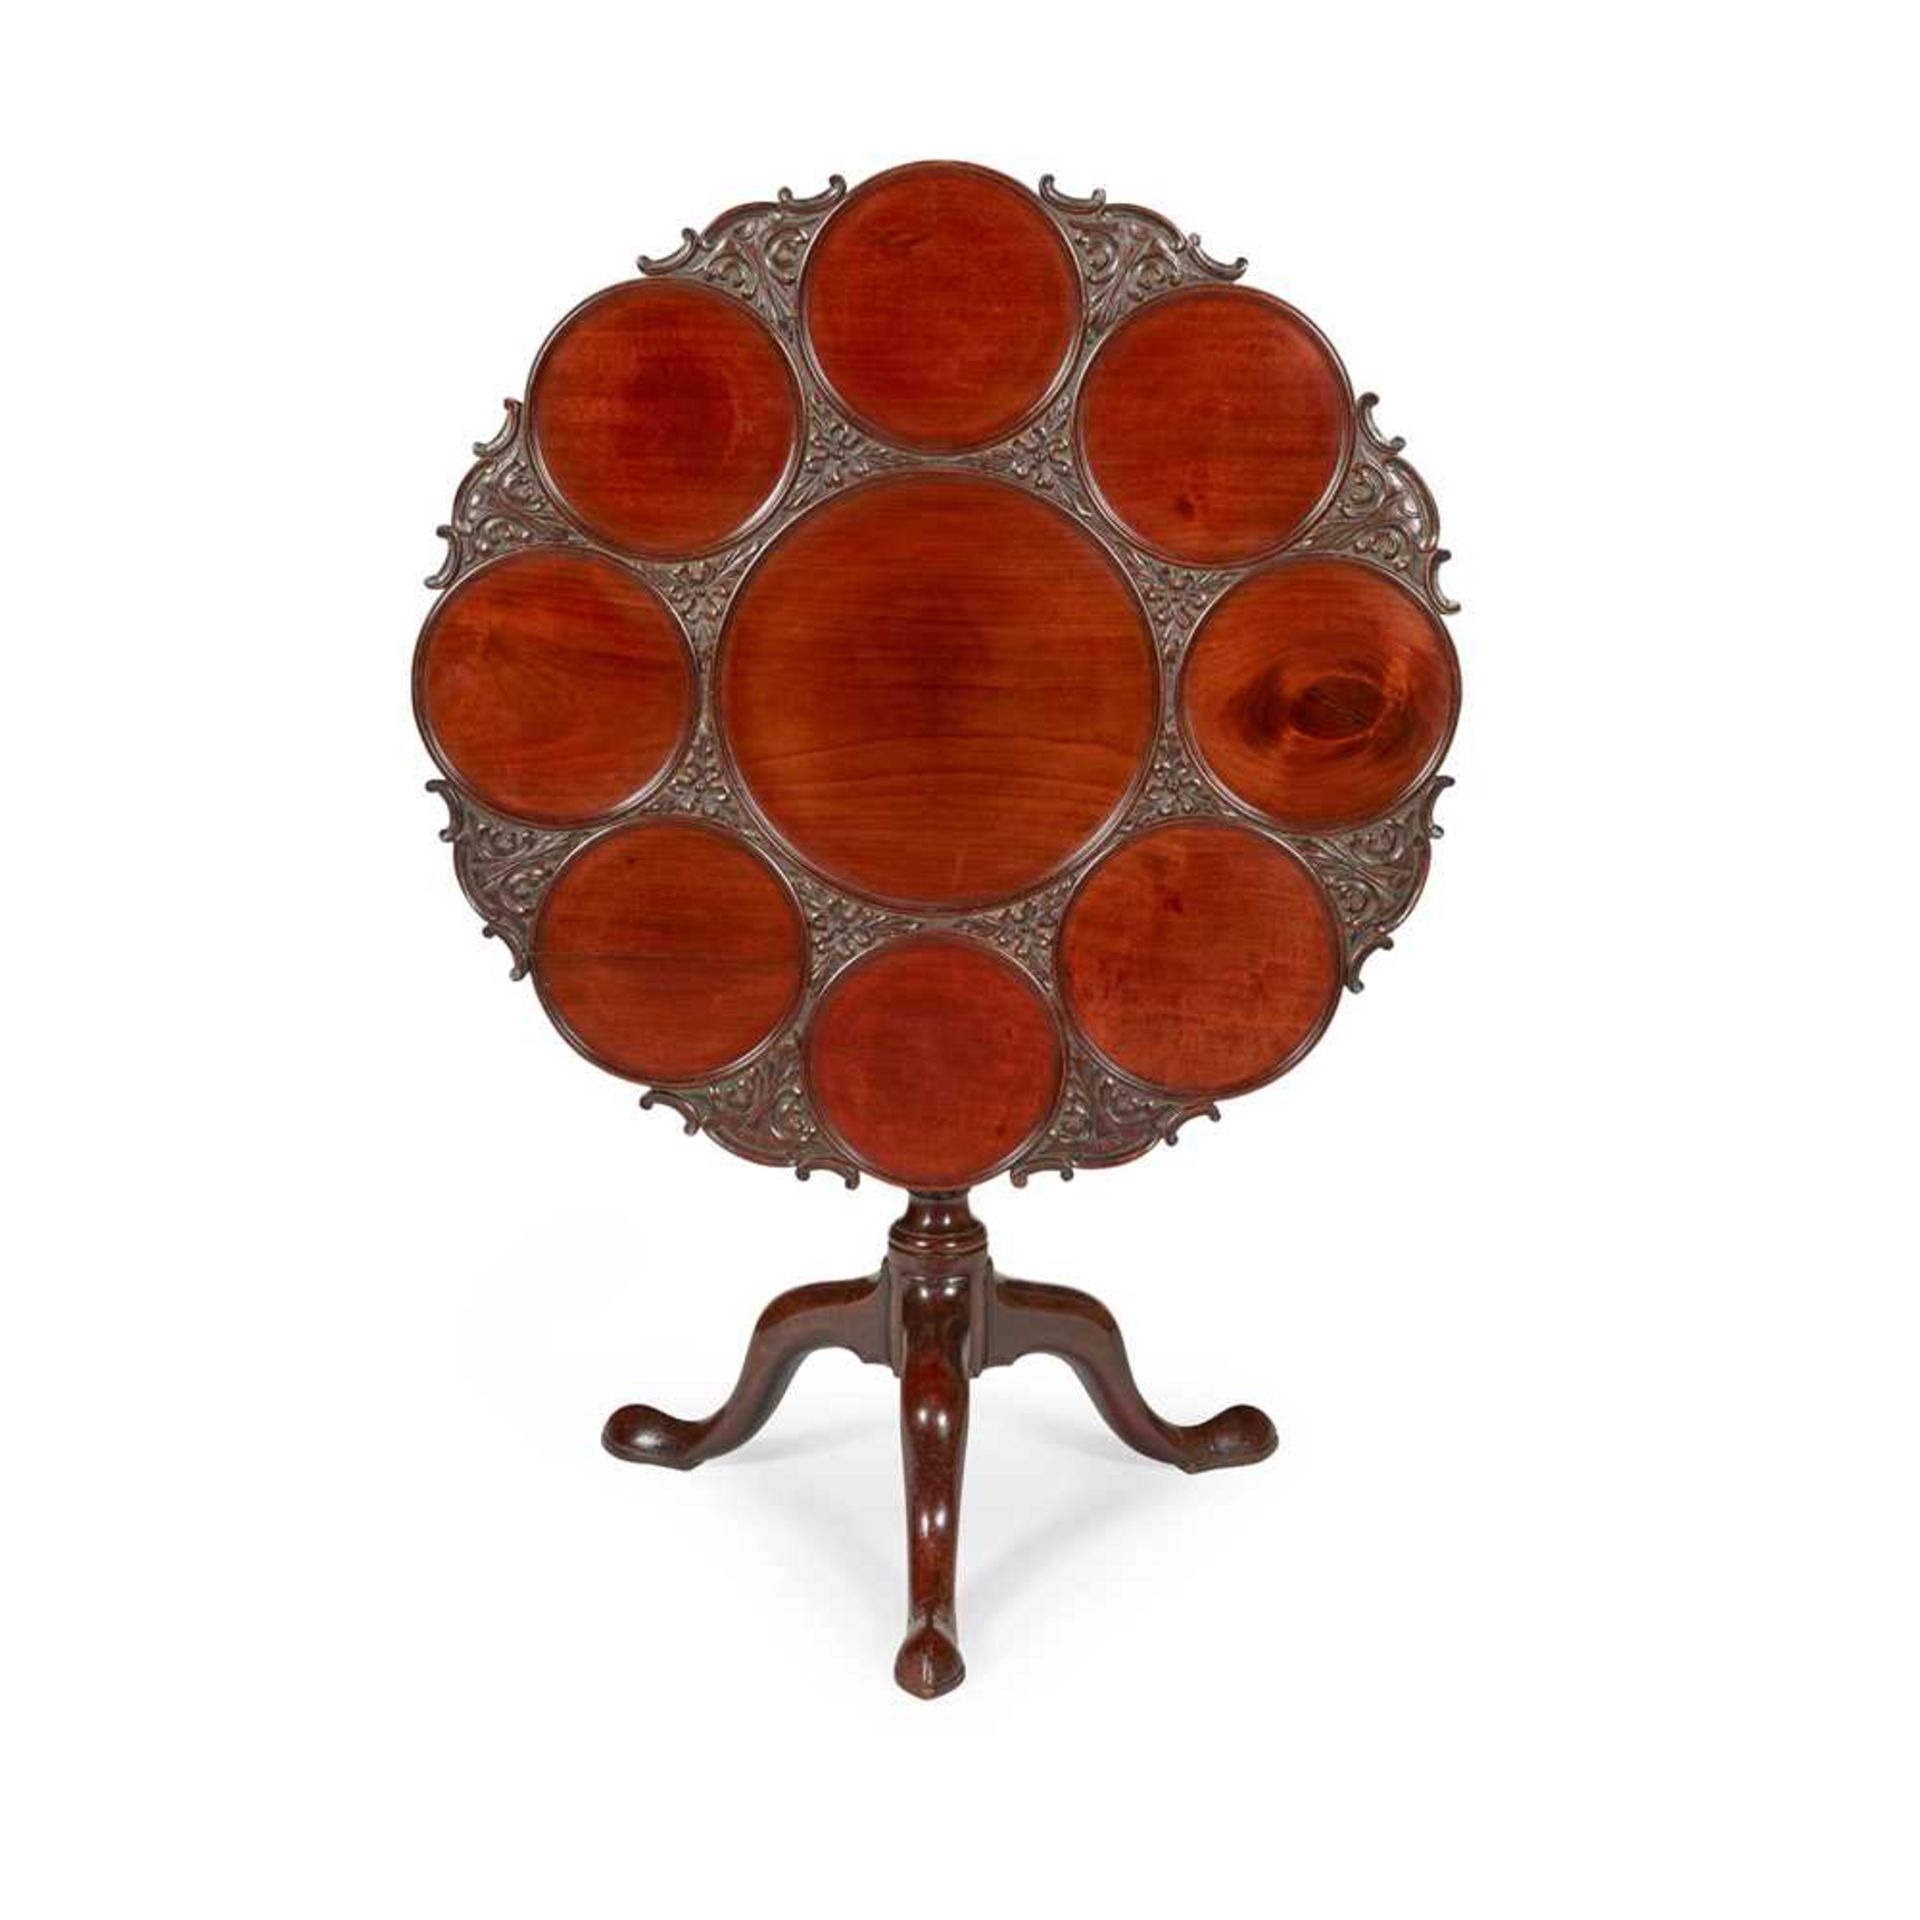 GEORGE III MAHOGANY CARVED BIRDCAGE SUPPER TABLE MID 18TH CENTURY - Image 2 of 8